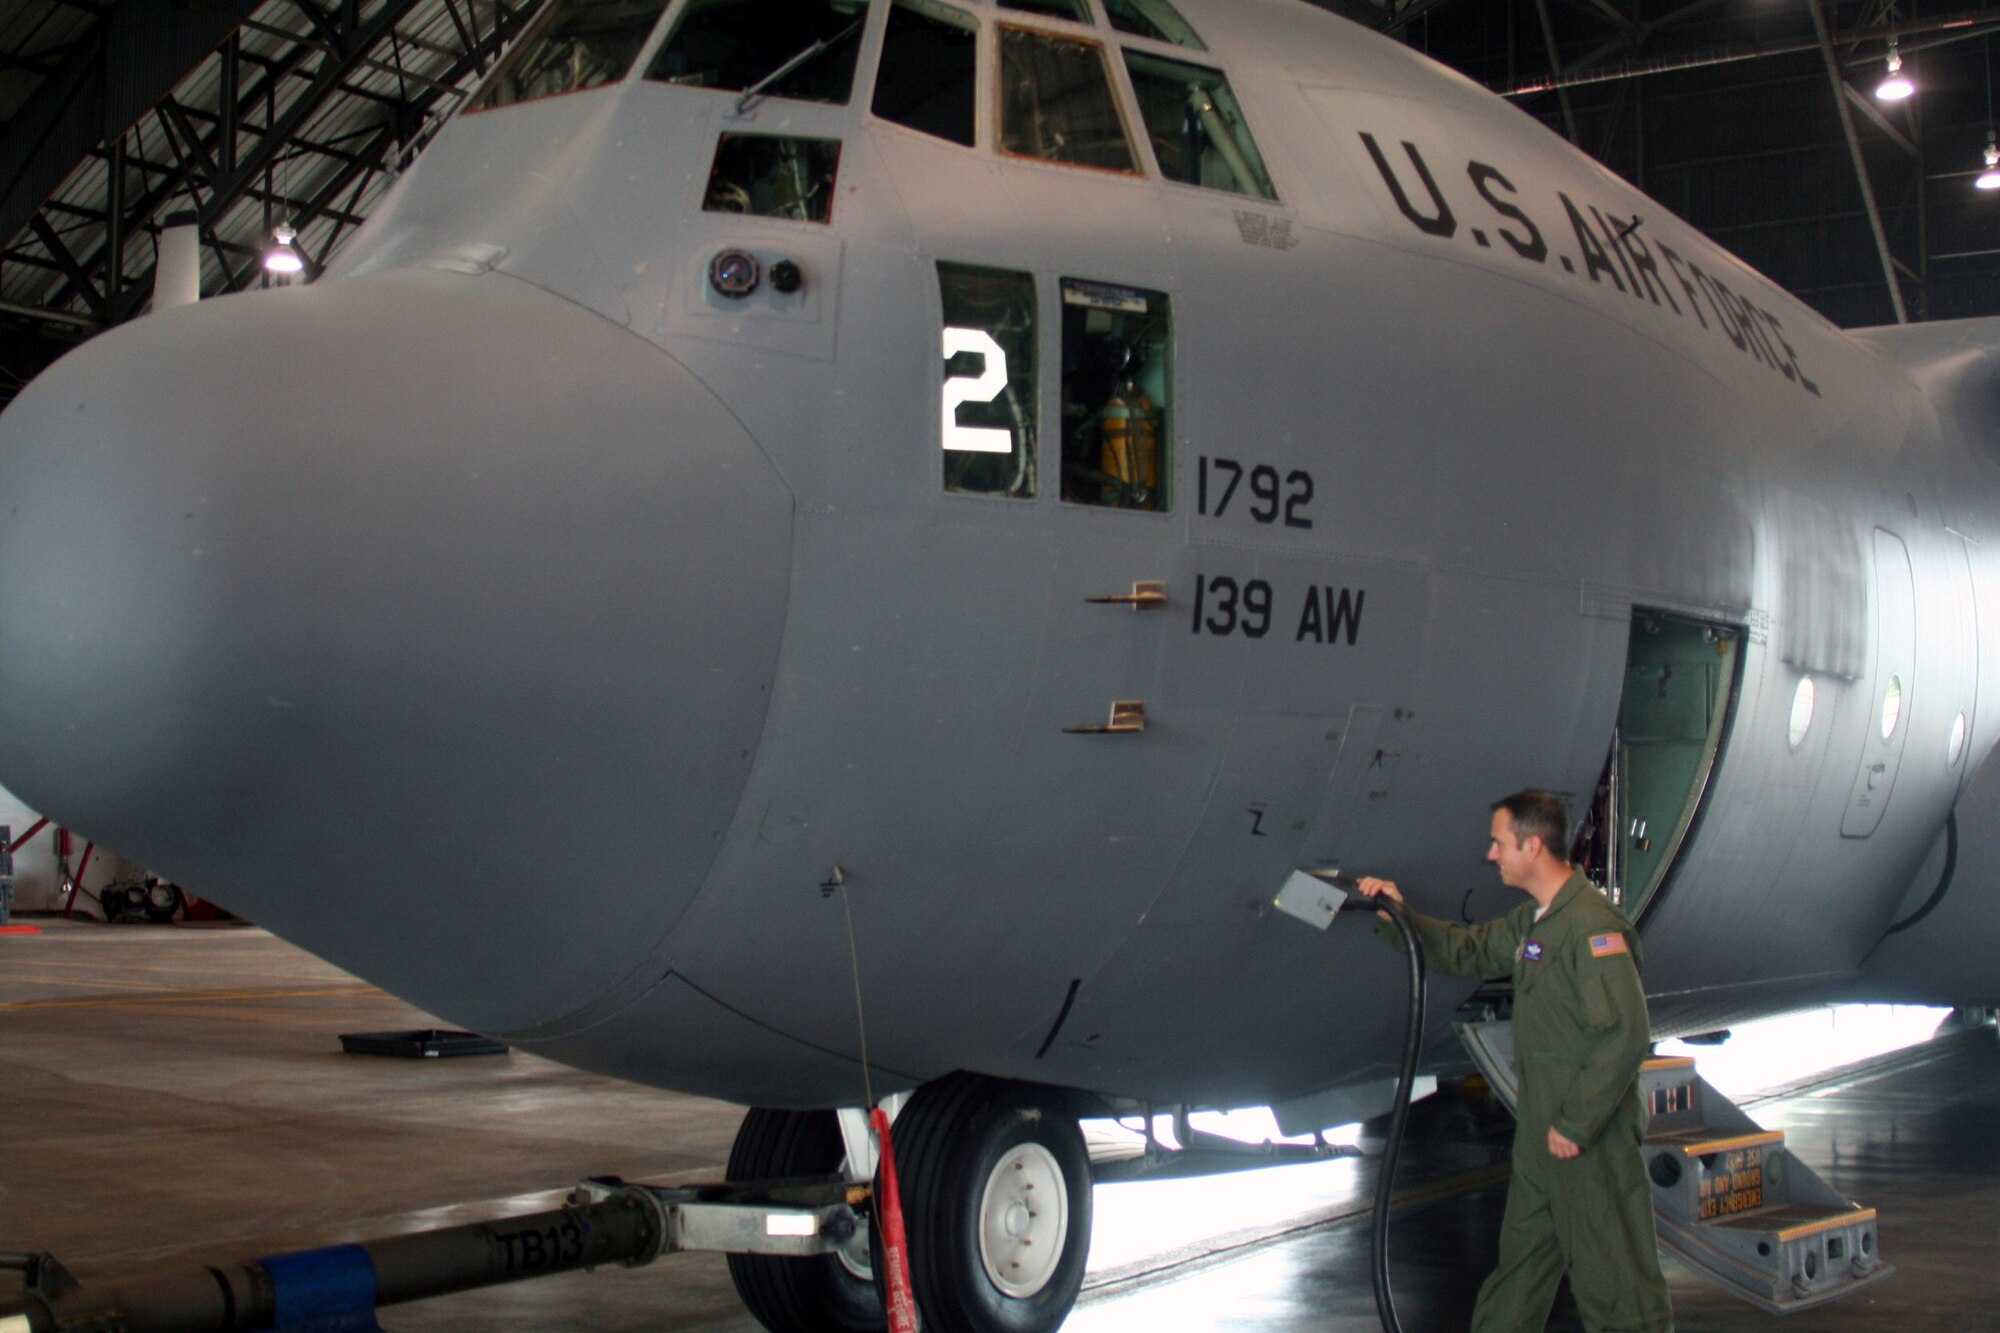 Master Sgt. John Gorsuch, C-130 Hercules loadmaster and instructor for Air Mobility Command's Detachment 5 at the Advanced Airlift Tactics Training Center at St. Joseph, Mo., looks over a C-130 aircraft display at Scott Air Force Base, Ill., on Aug. 20, 2010. (U.S. Air Force Photo/Master Sgt. Scott T. Sturkol)